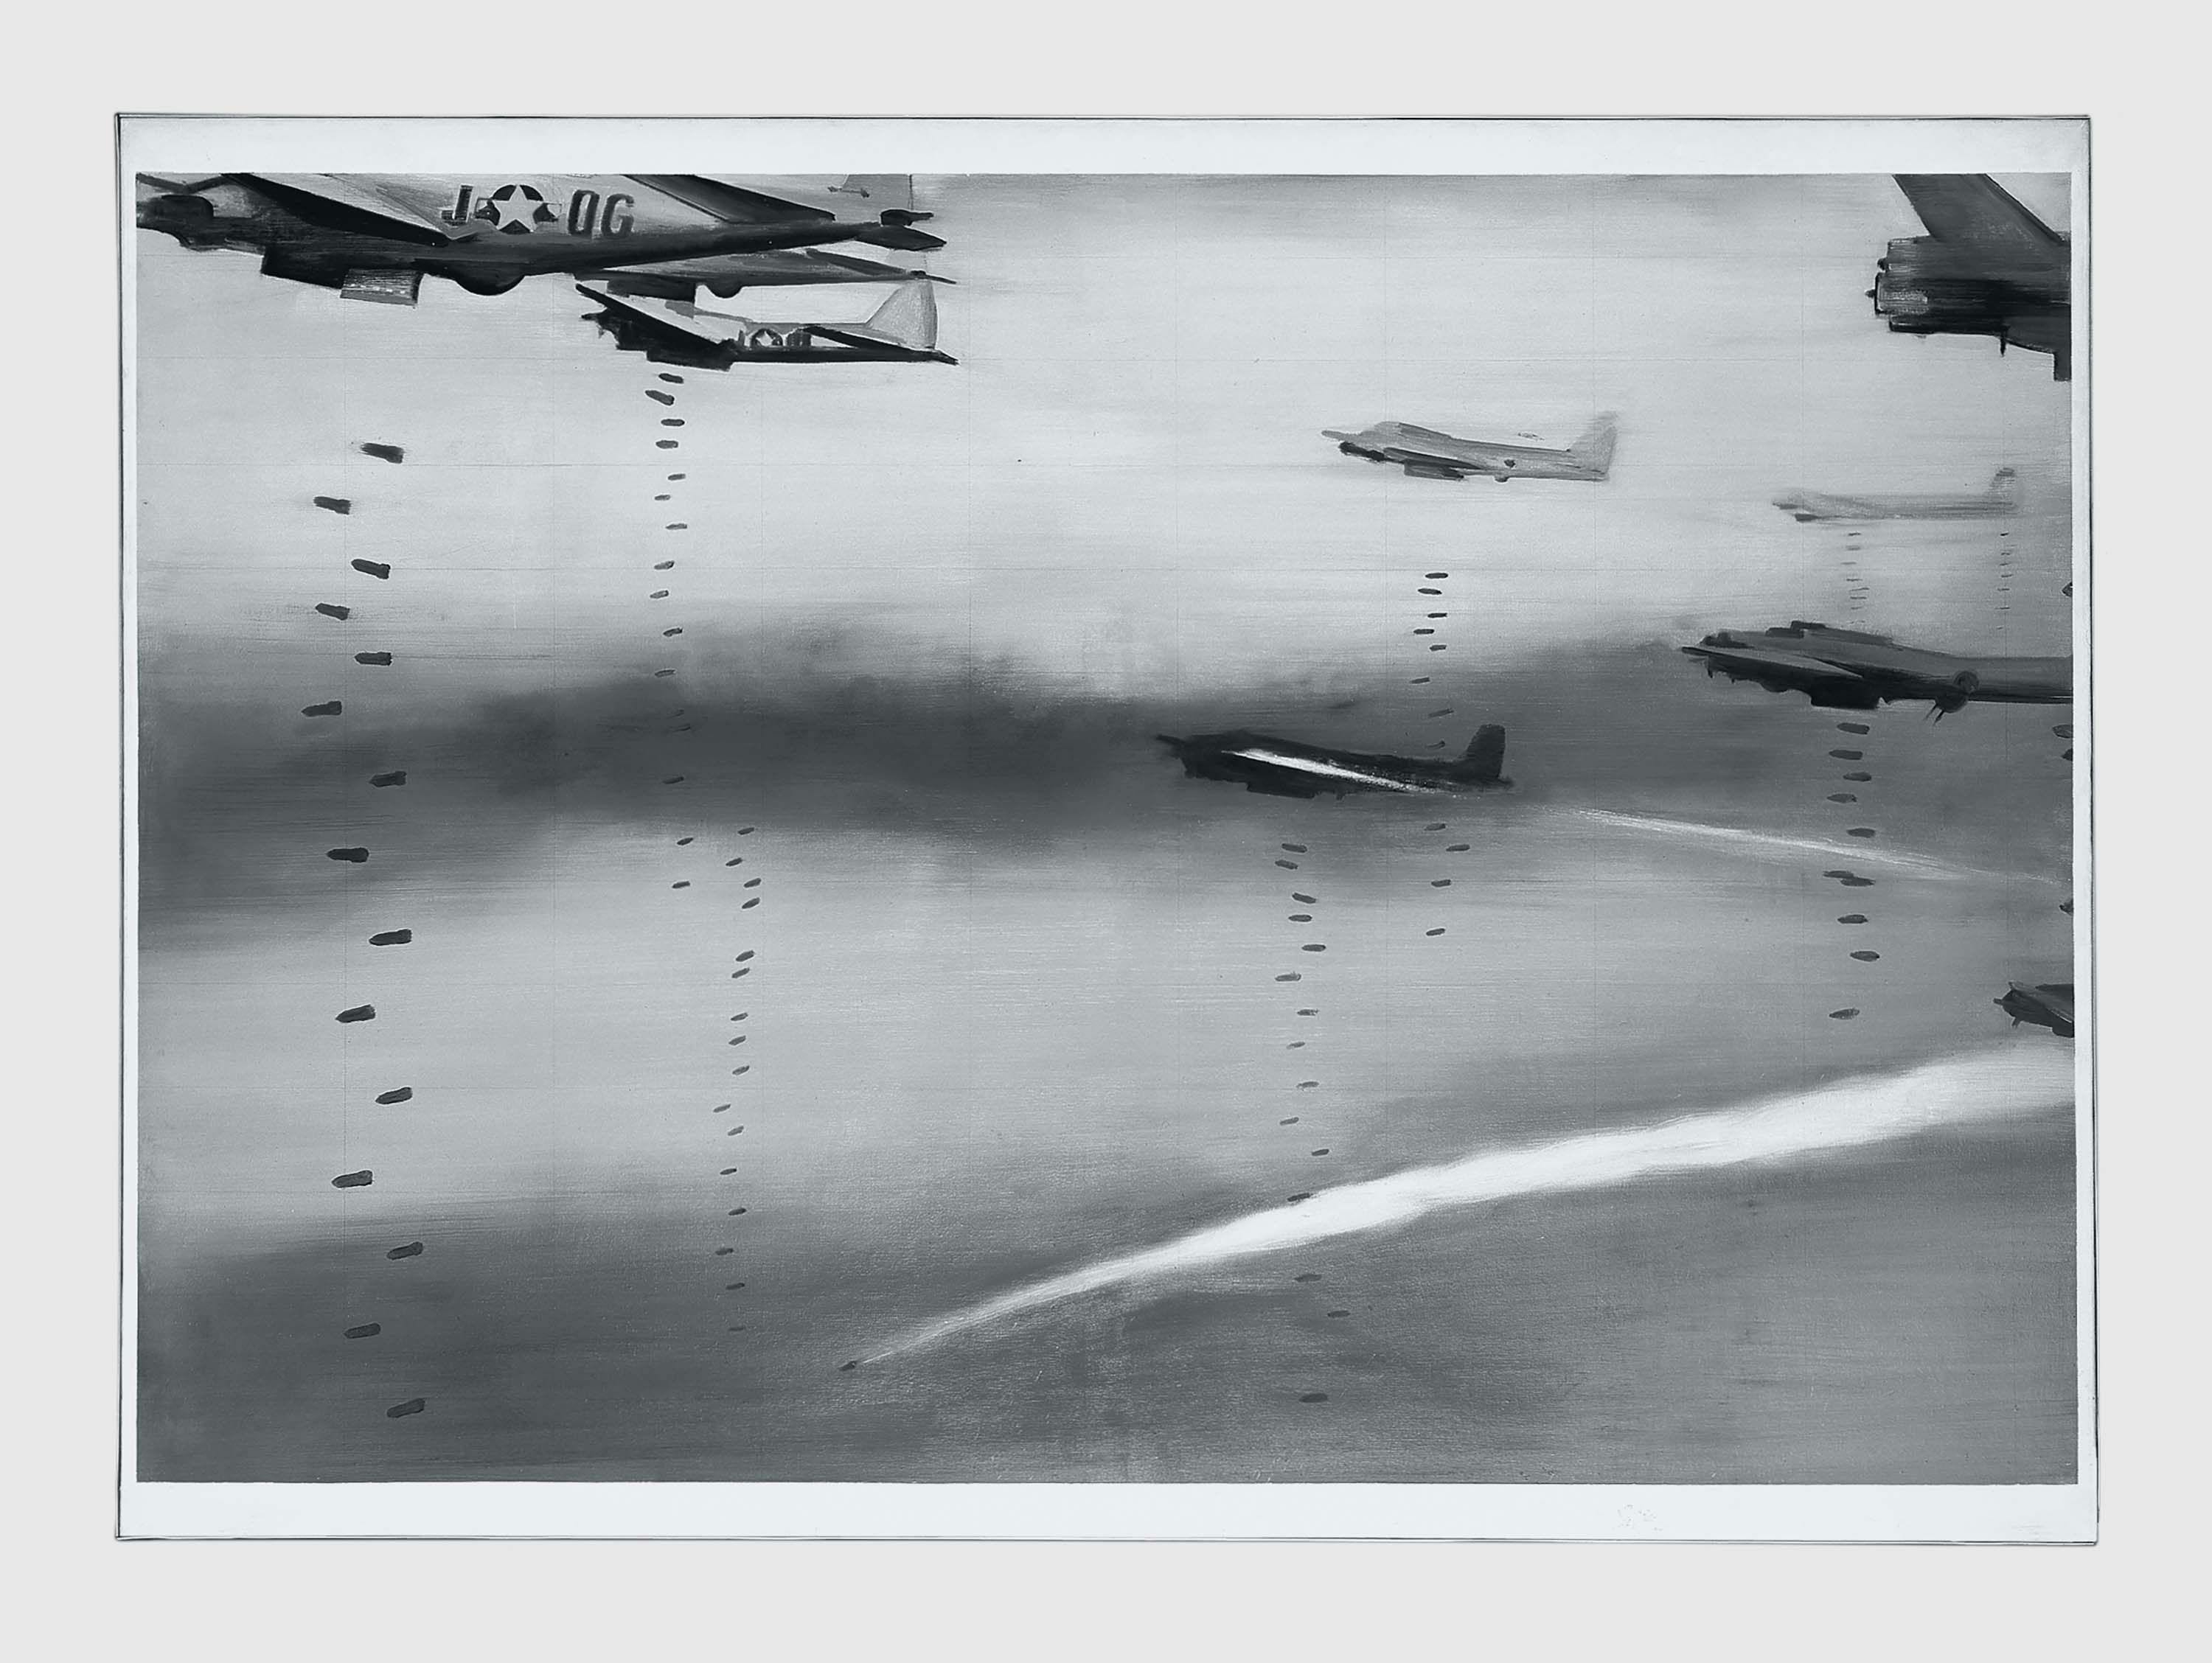 A painting by Gerhard Richter, titled Bomber (Bombers), dated 1963.